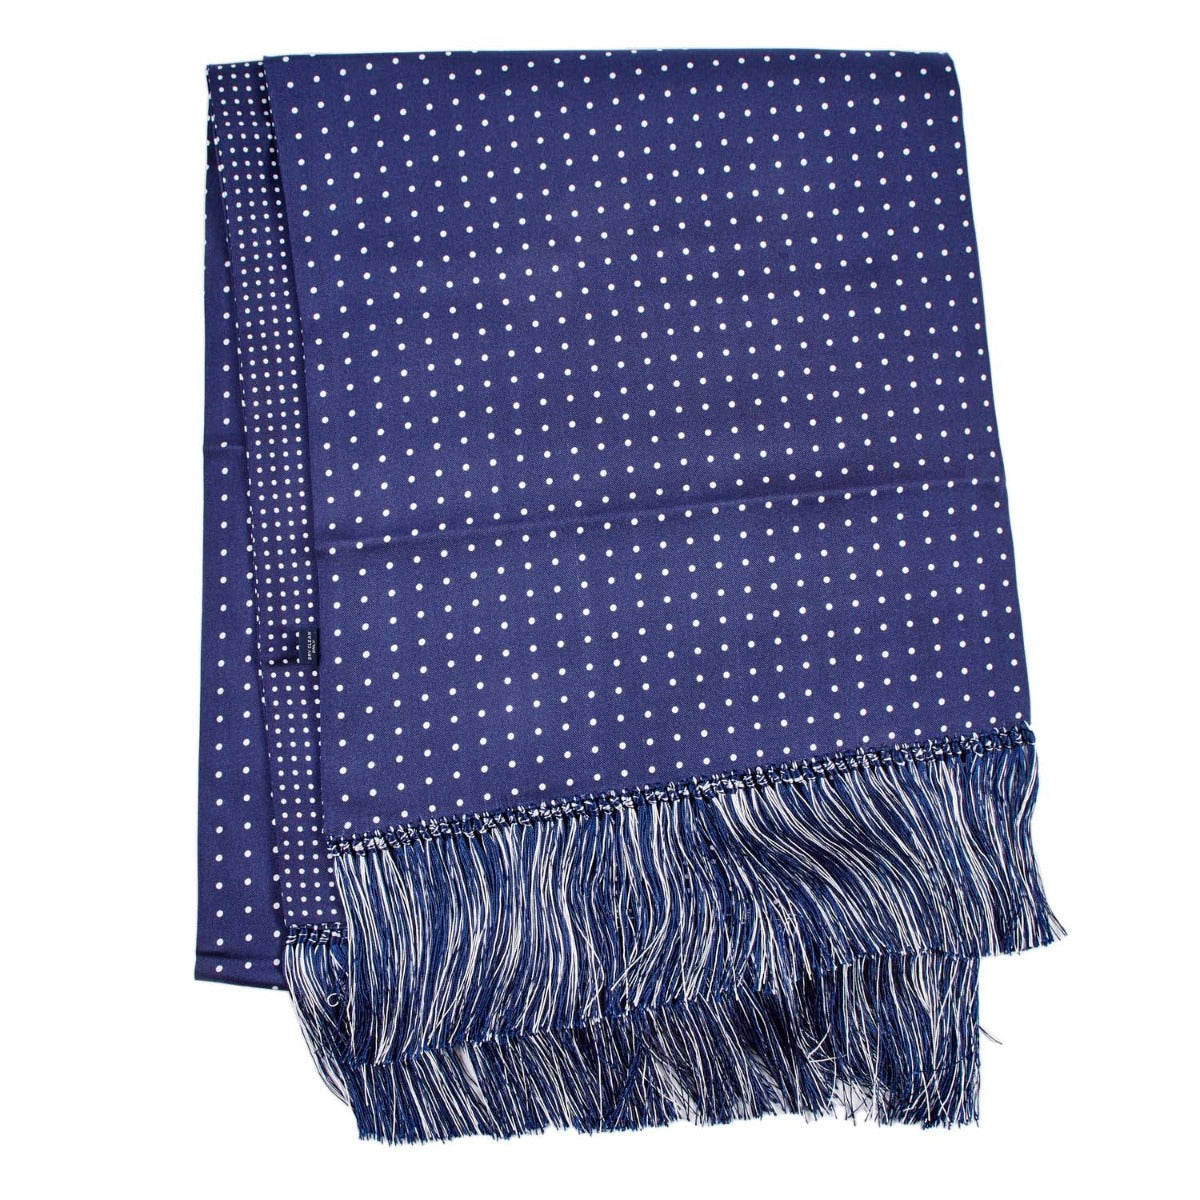 A Sovereign Grade Navy London Dot 36oz Reversible Printed Silk Scarf by KirbyAllison.com, with fringes, perfect for winter in England.